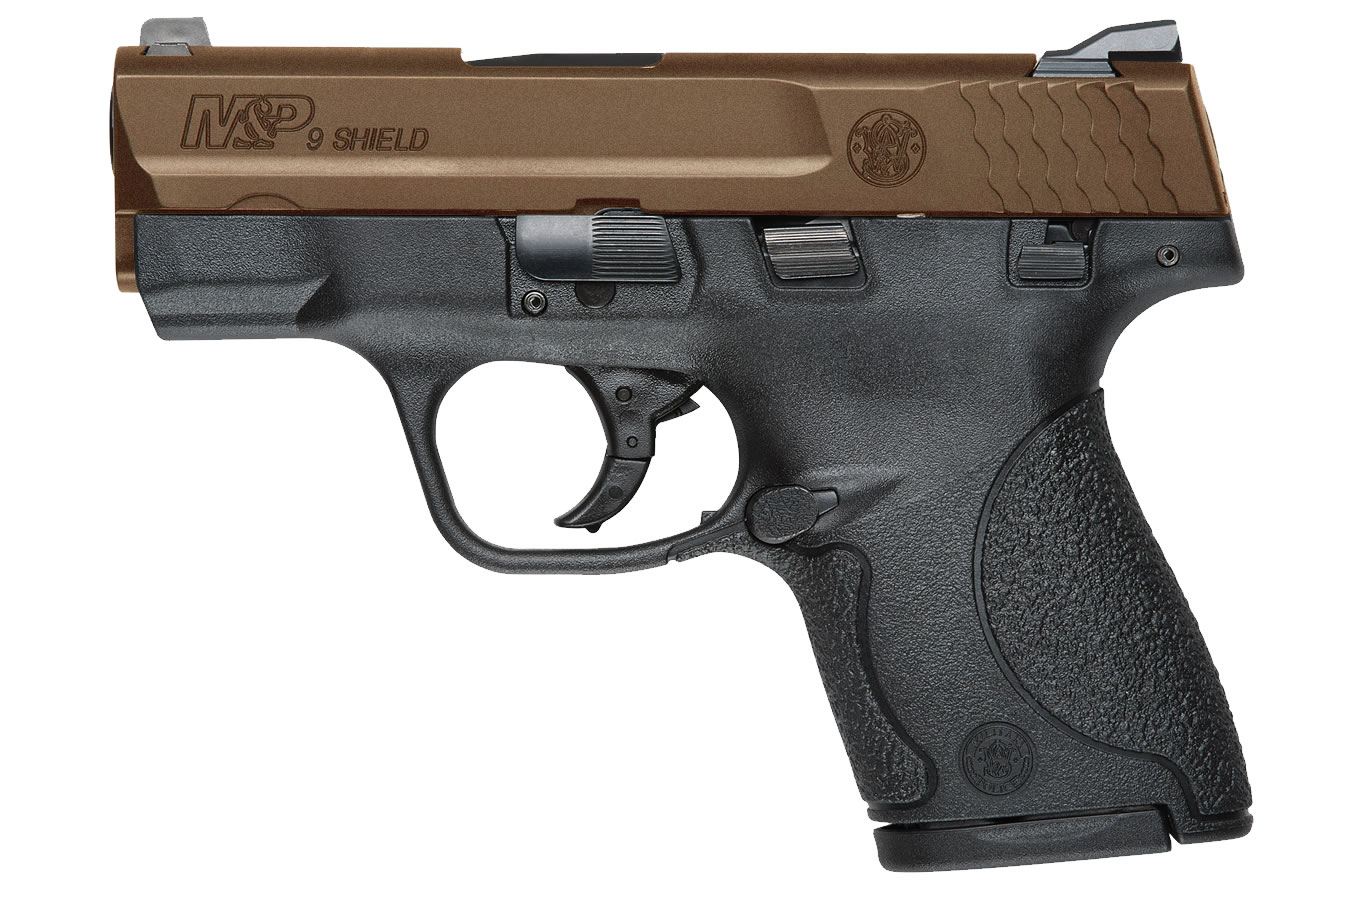 SMITH AND WESSON MP9 SHIELD 9MM CENTERFIRE PISTOL WITH BRONZE CERAKOTE SLIDE AND THUMB SAFETY